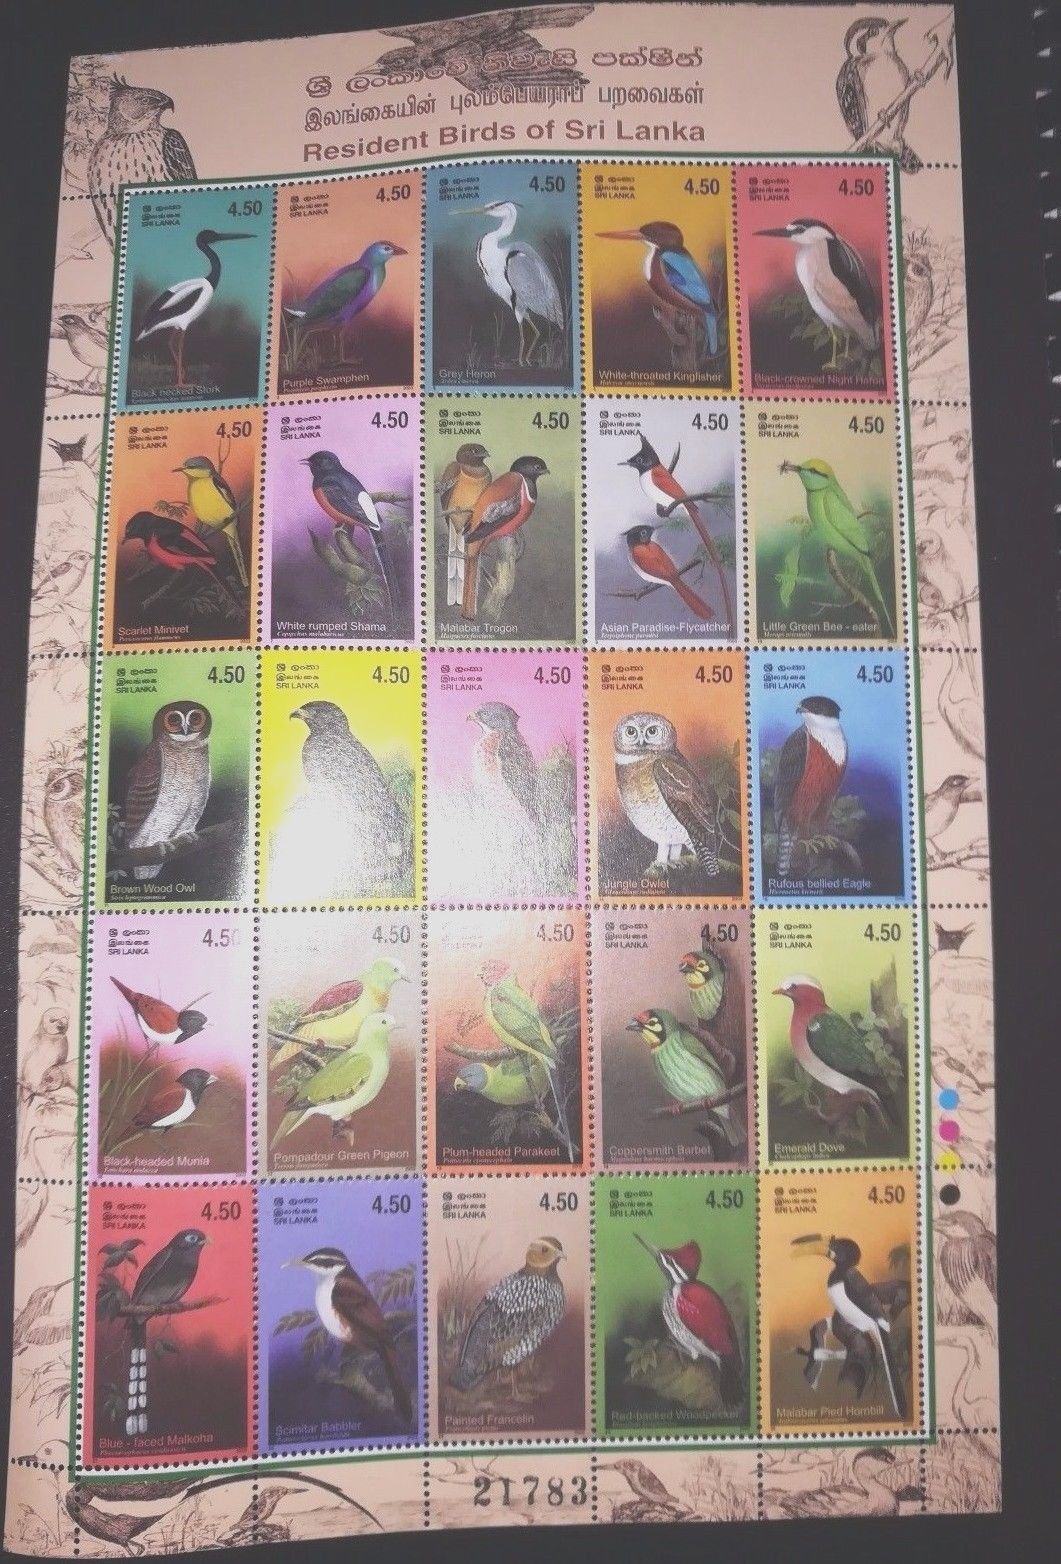 Sri Lanka Stamps- Resident Birds stamps Sheet 20 stamps MNH - year 2003